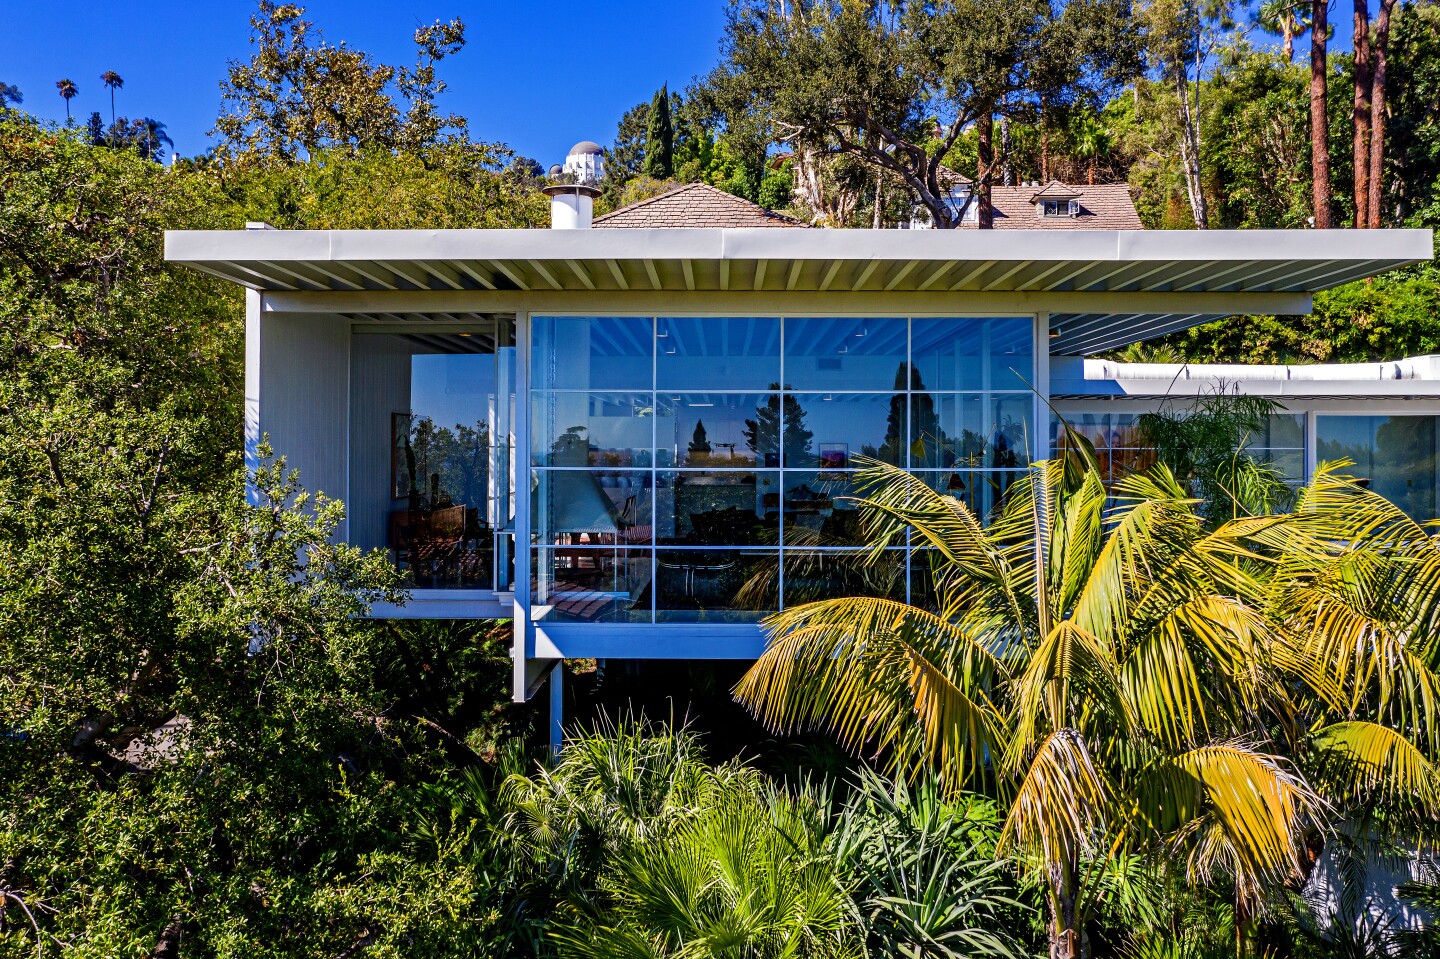 Maroon 5 guitarist James B. Valentine is seeking $3.785 million for a pristine Midcentury Modern-style home in Los Feliz. The striking residence, designed by Neil A. Johnson and built in 1960, was extensively restored by Mark Haddawy during Valentine's decade-plus of ownership. The single-story house features such modernist staples as terrazzo floors, beamed ceilings and walls of floor-to-ceiling windows. A suspended fireplace is an attention-grabber in the living room. The 2,100-square-foot house also has a garden-view dining room, an updated kitchen, three bedrooms and two bathrooms.